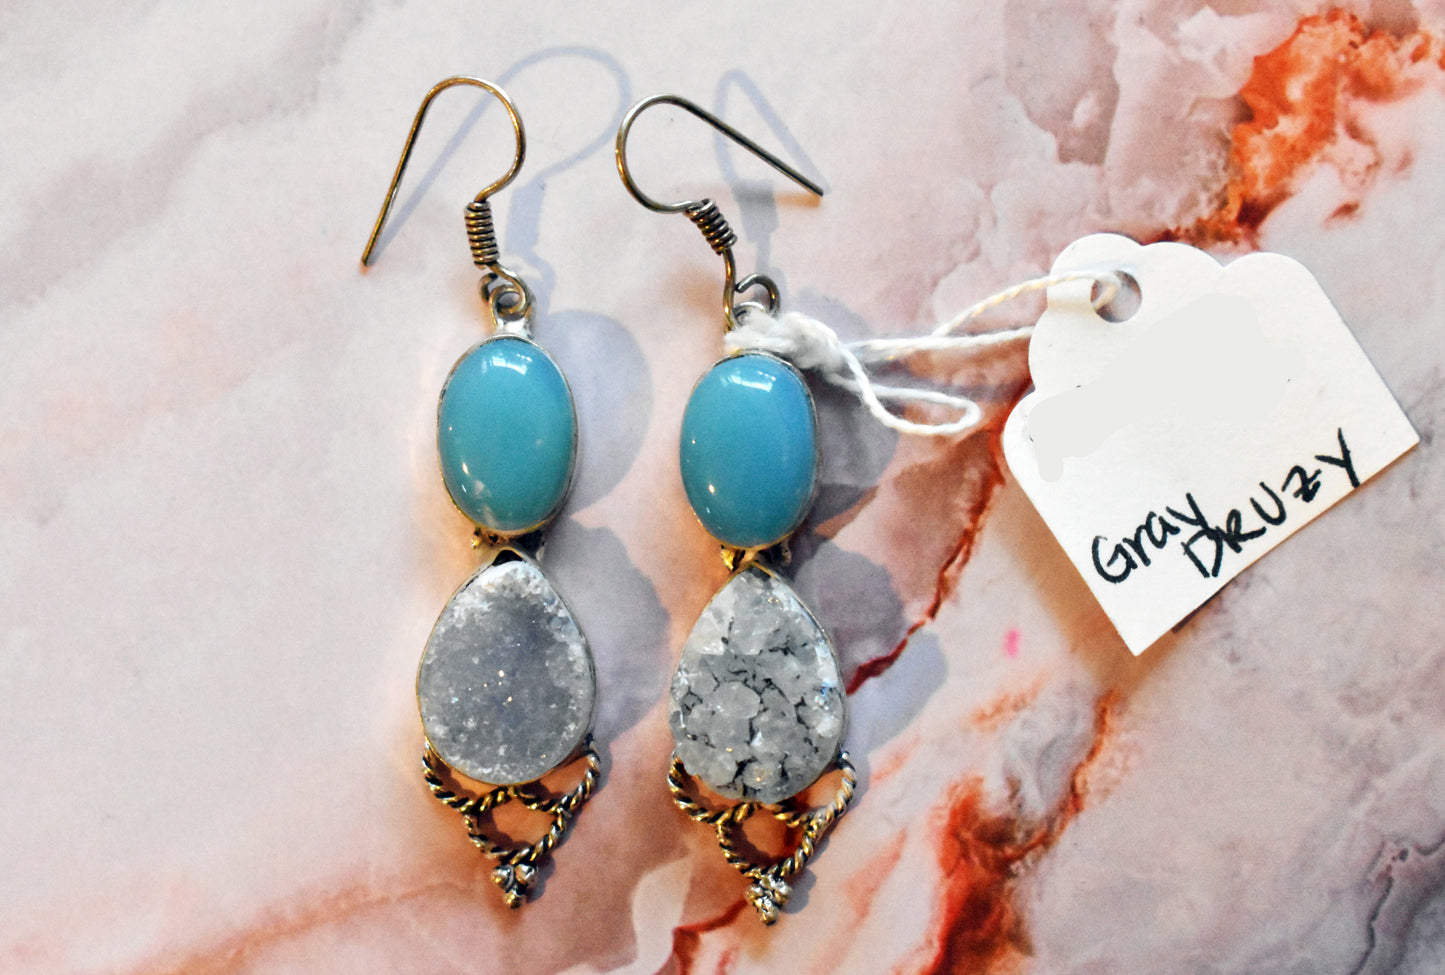 stones-of-transformation - Chalcedony with Gray Druzy Earrings - Stones of Transformation - 